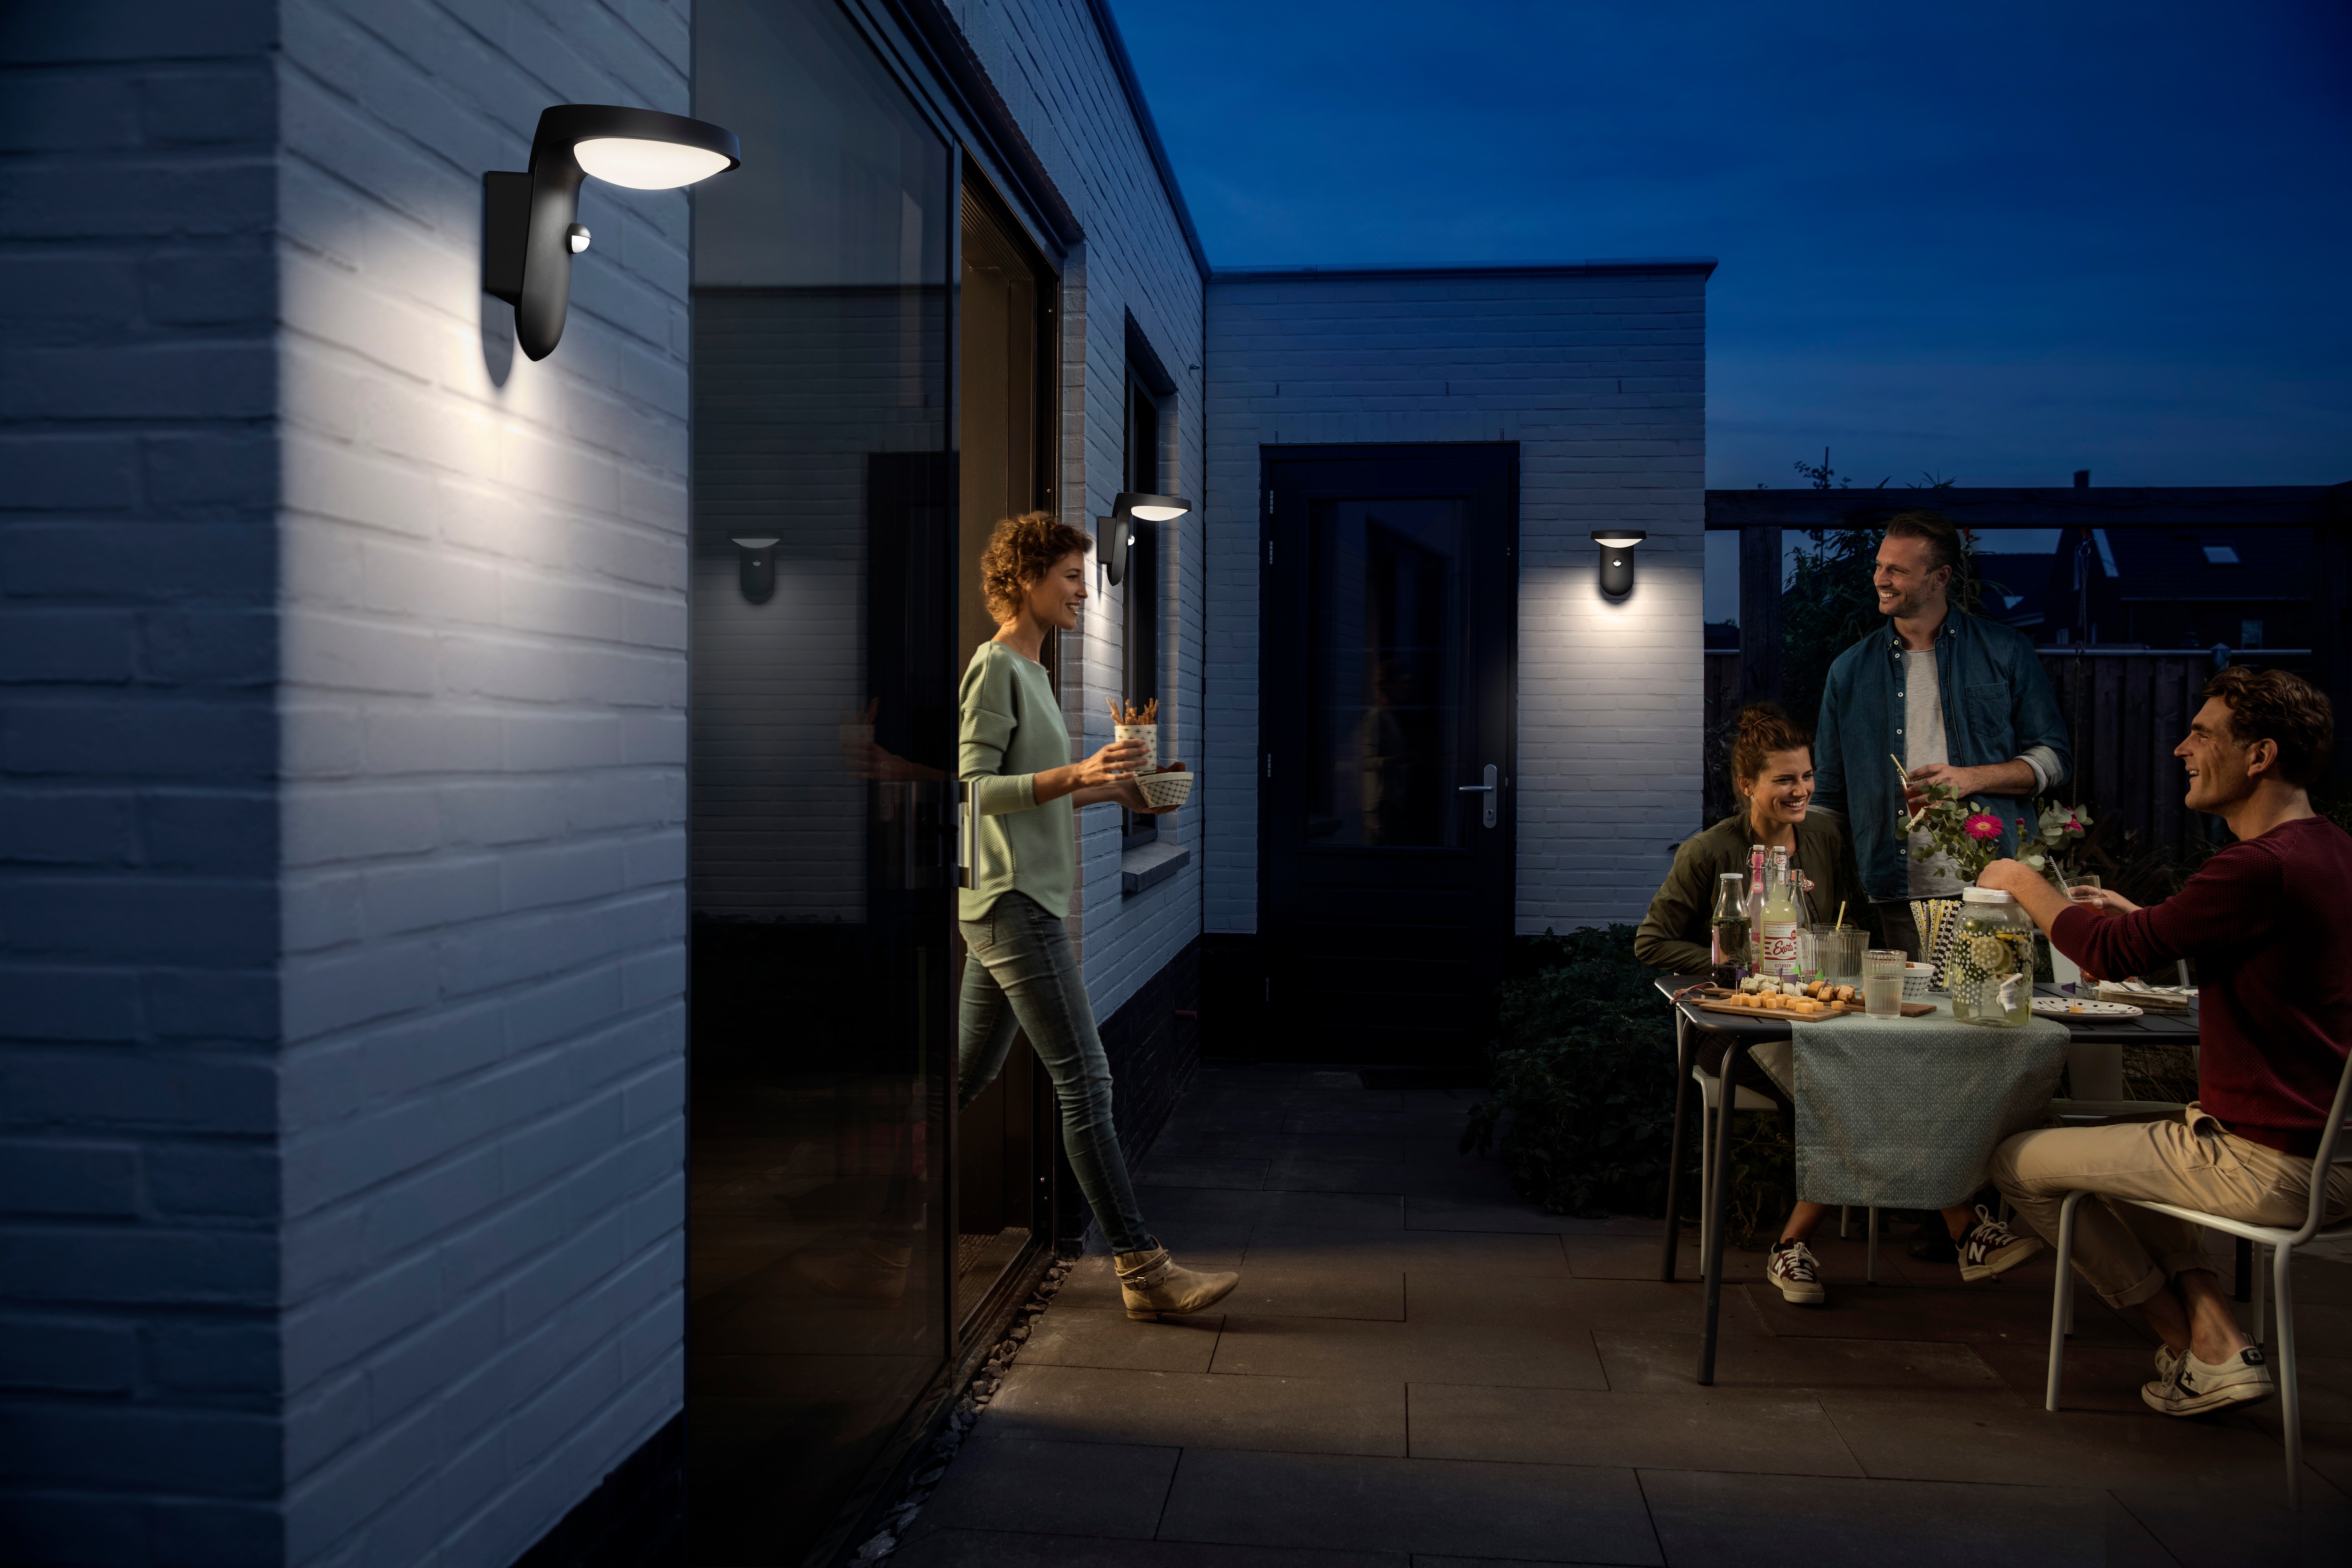 Philips LED energy-saving and durable outdoor lights